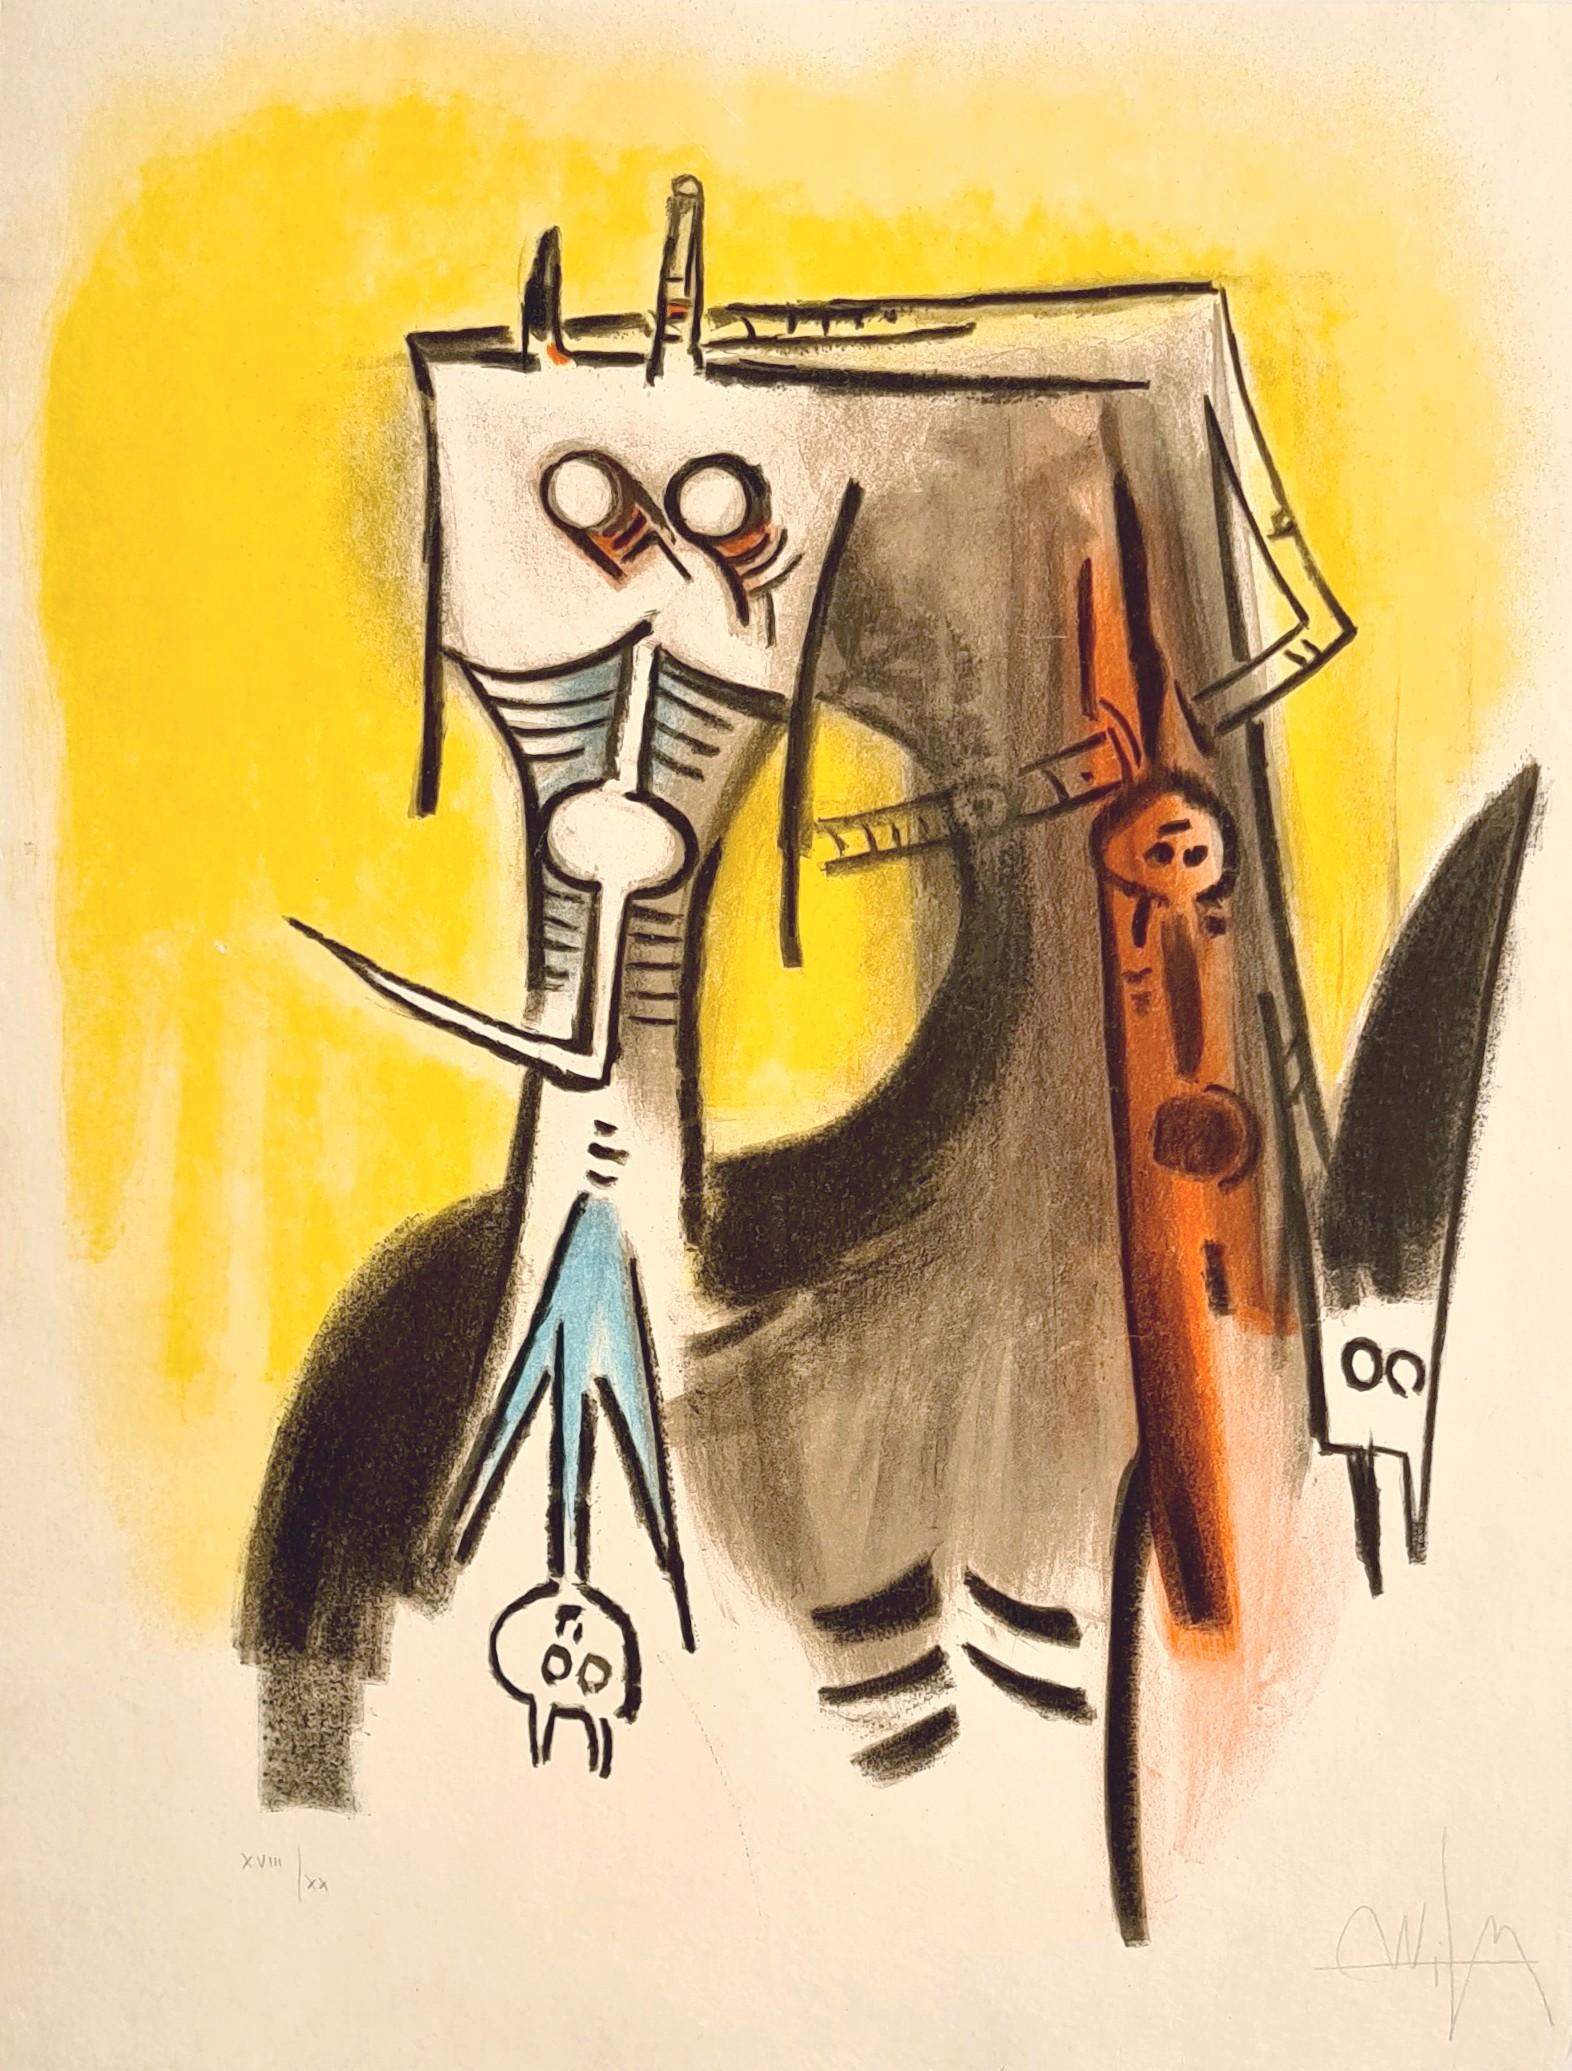 Abstract Print Wifredo Lam - Ils ont le cou des échassiers 